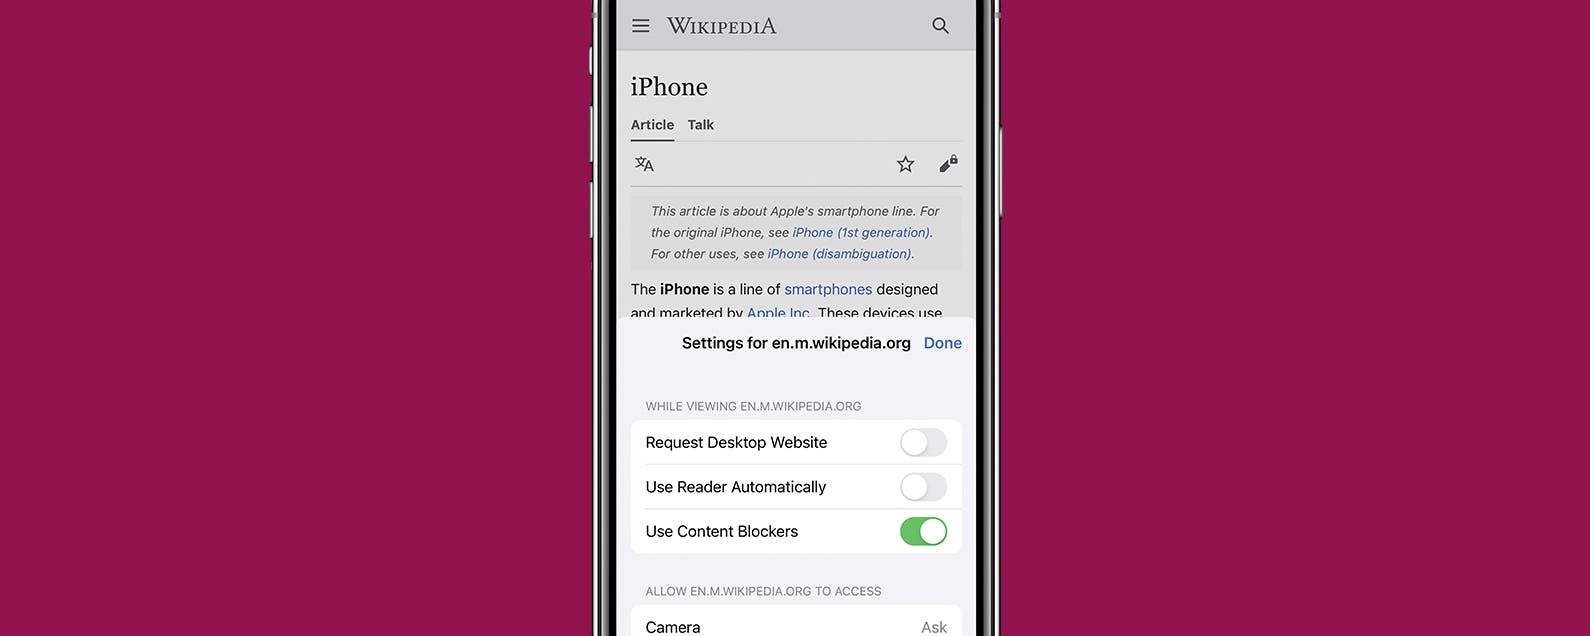 Apple adds Web, Wikipedia to Spotlight search in iPhone OS 4